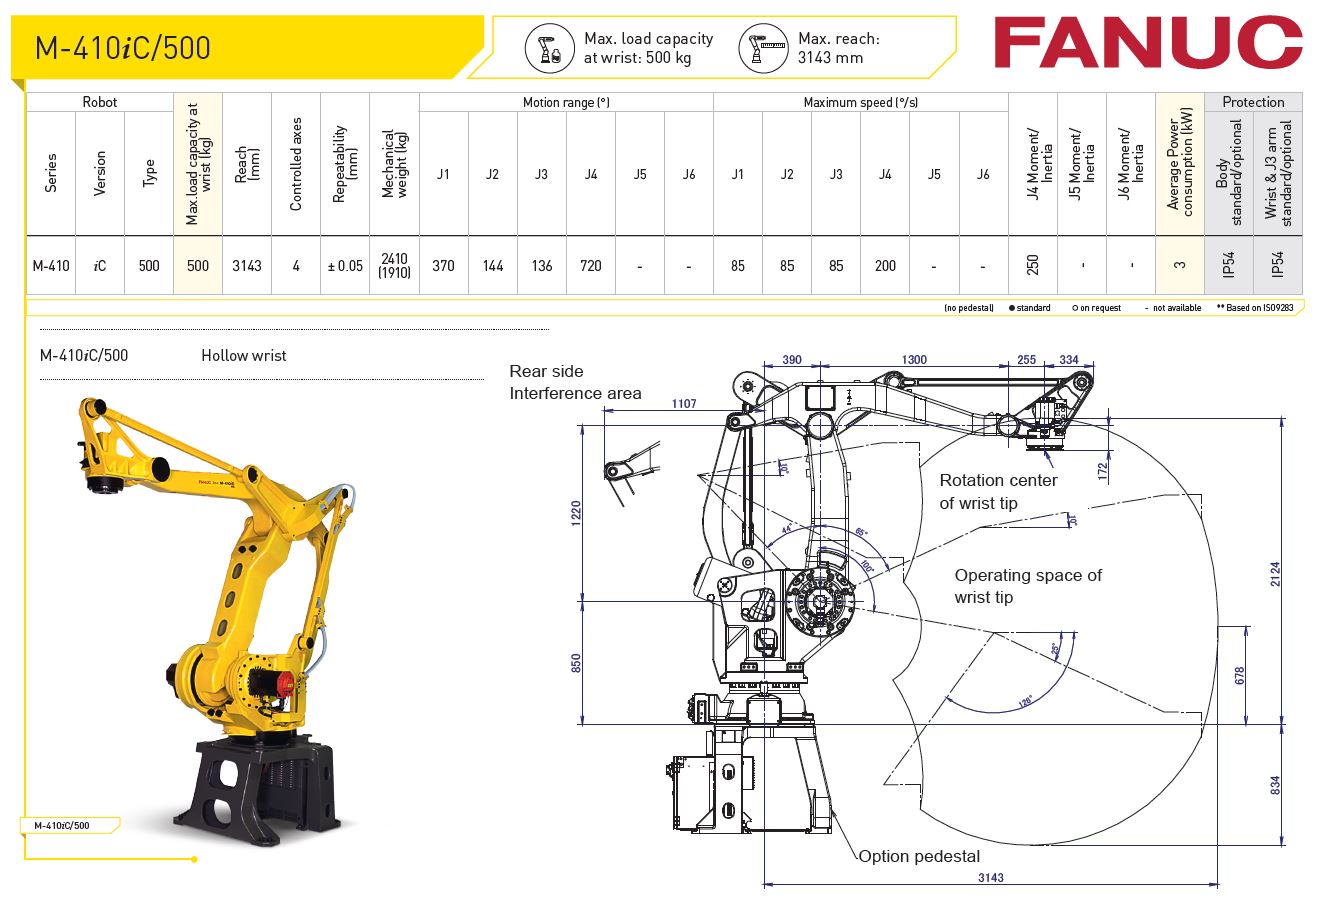 M-410iC-500 Fanuc Robot Specifications - RobotWorld